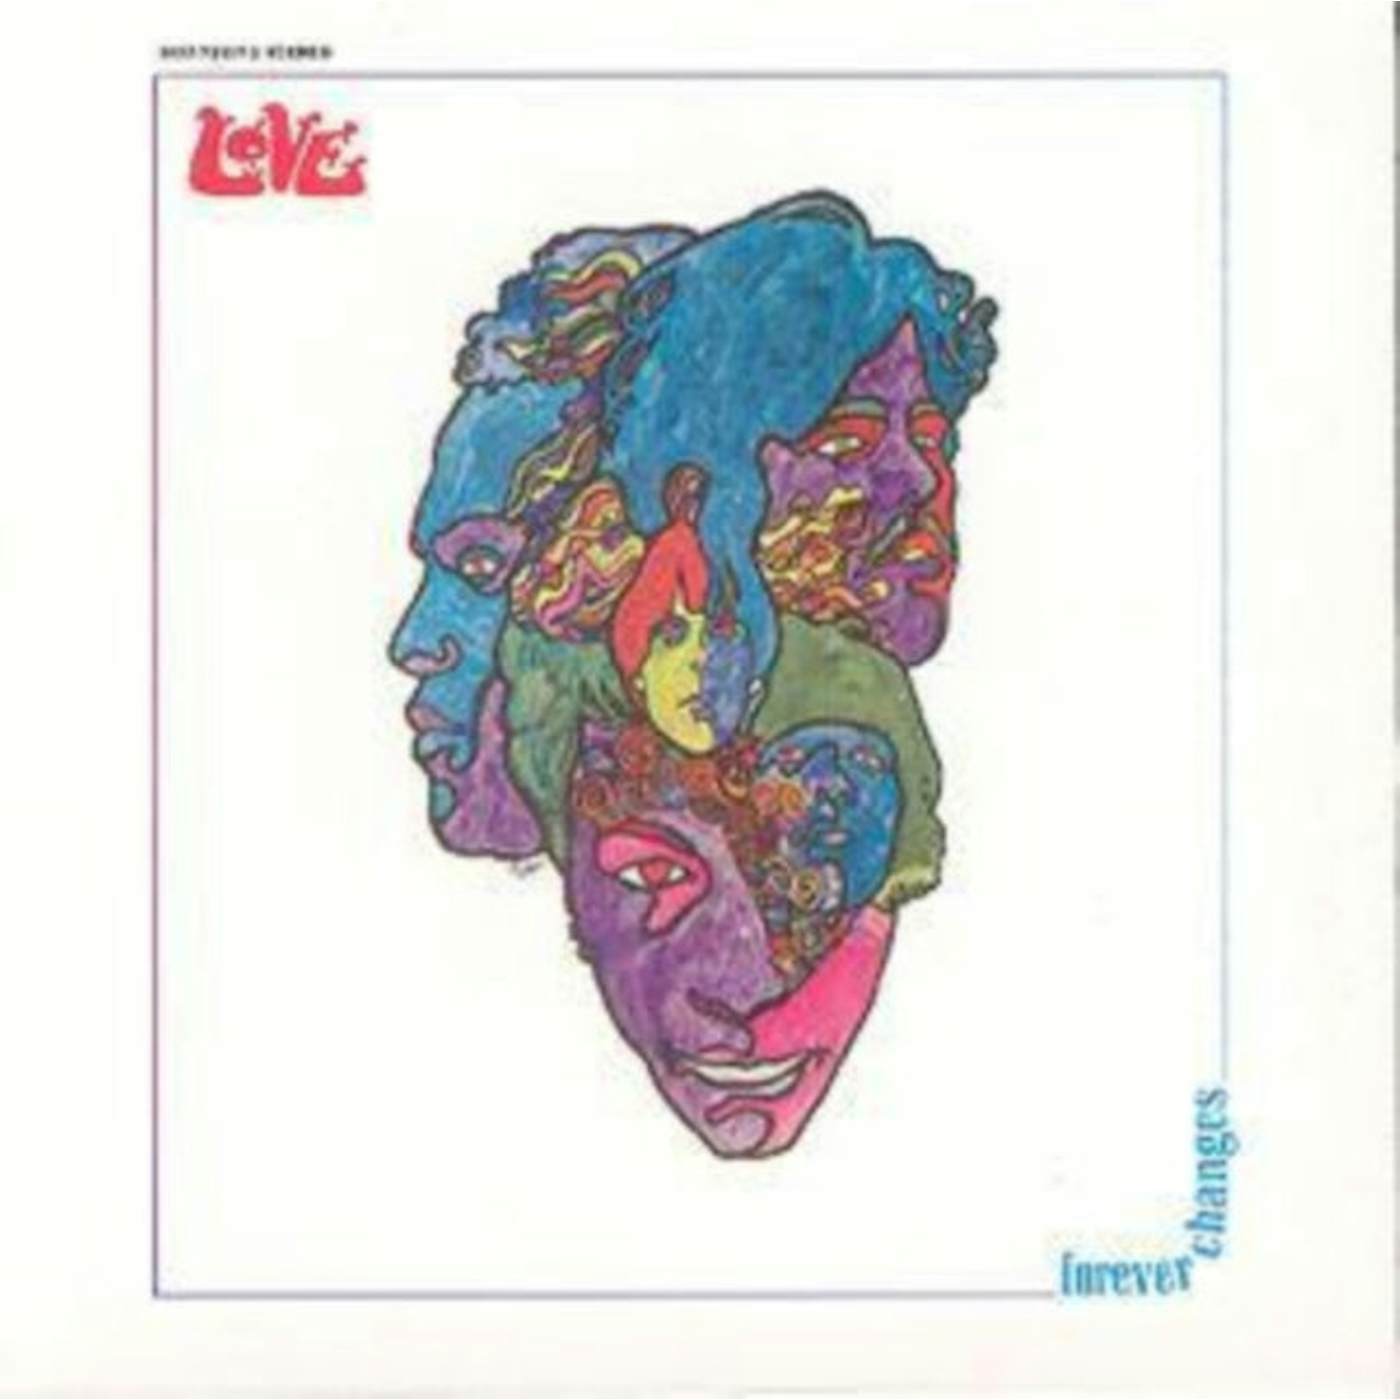 Love CD - Forever Changes - Expanded Version